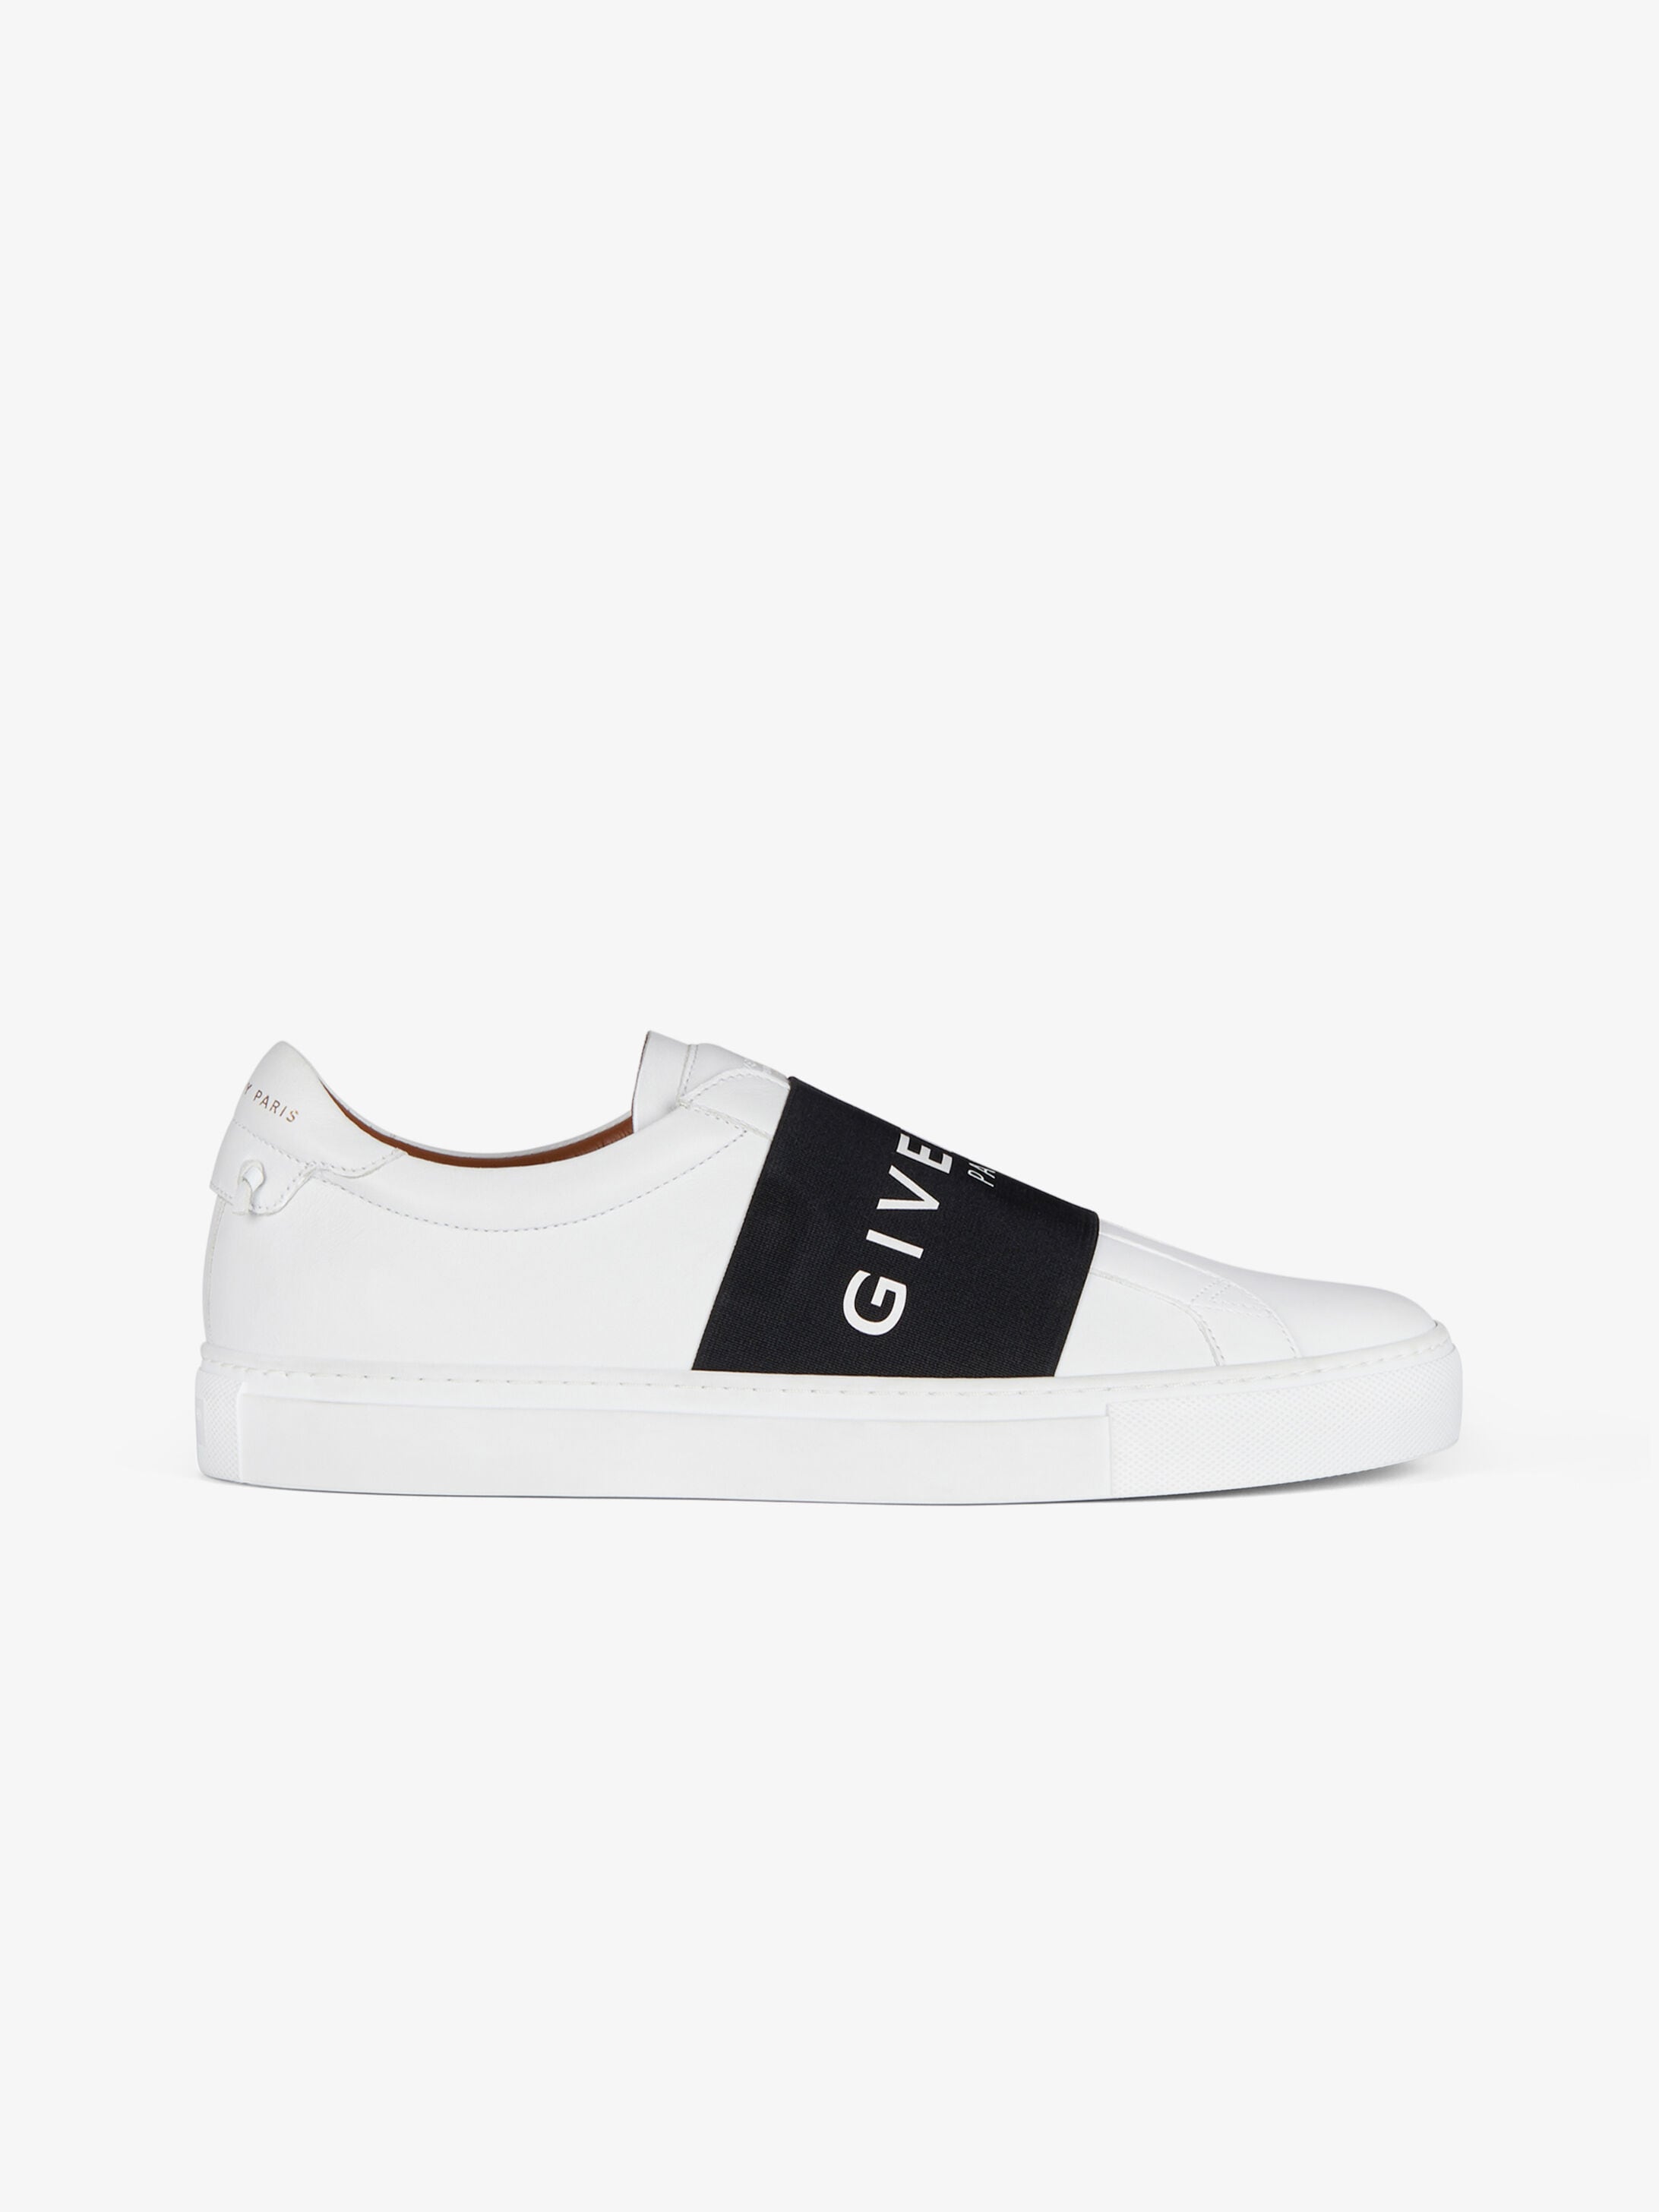 givenchy black sneakers